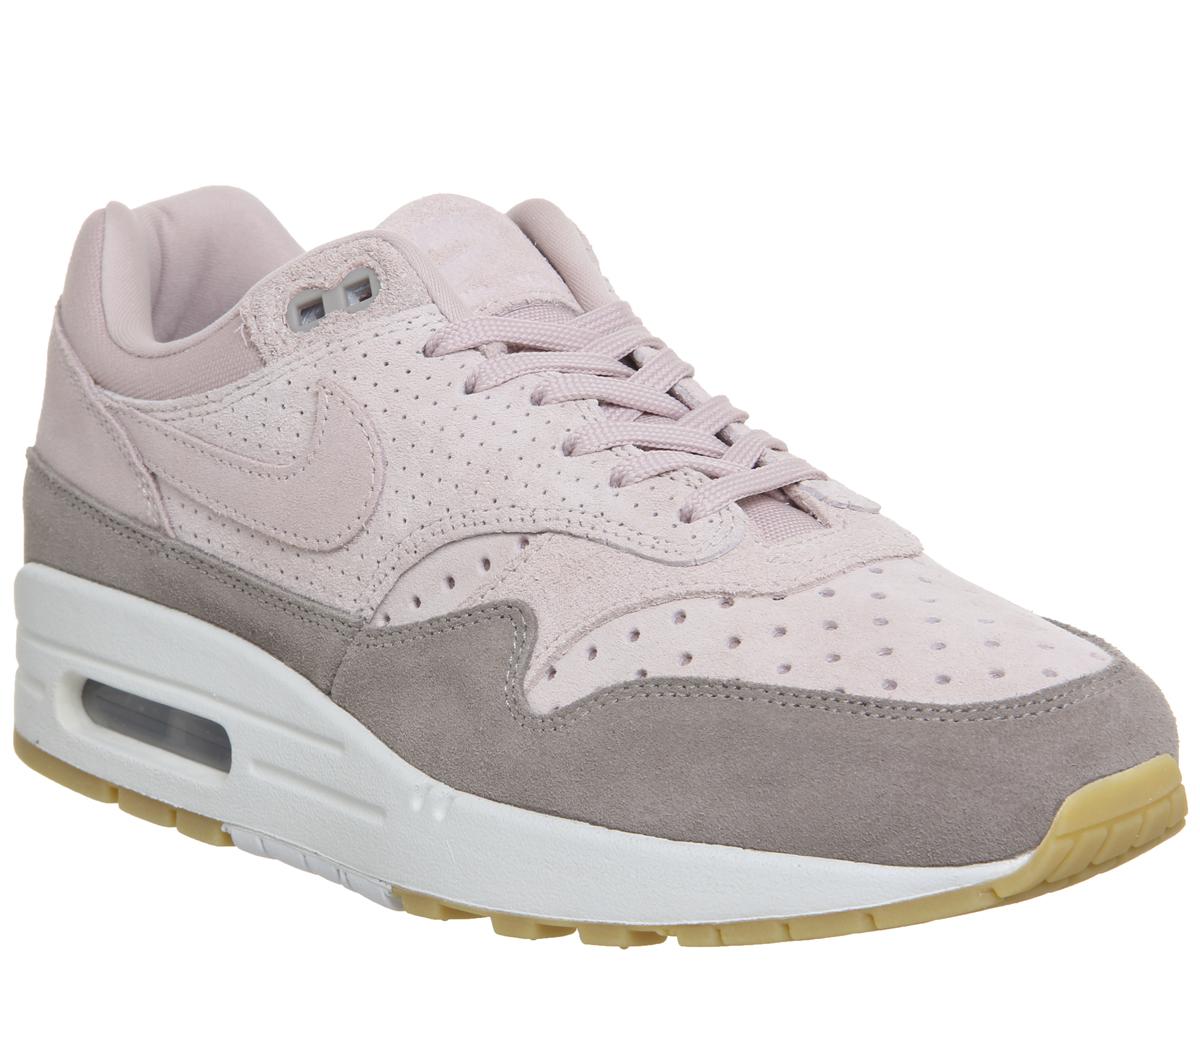 nike air max 1 particle beige